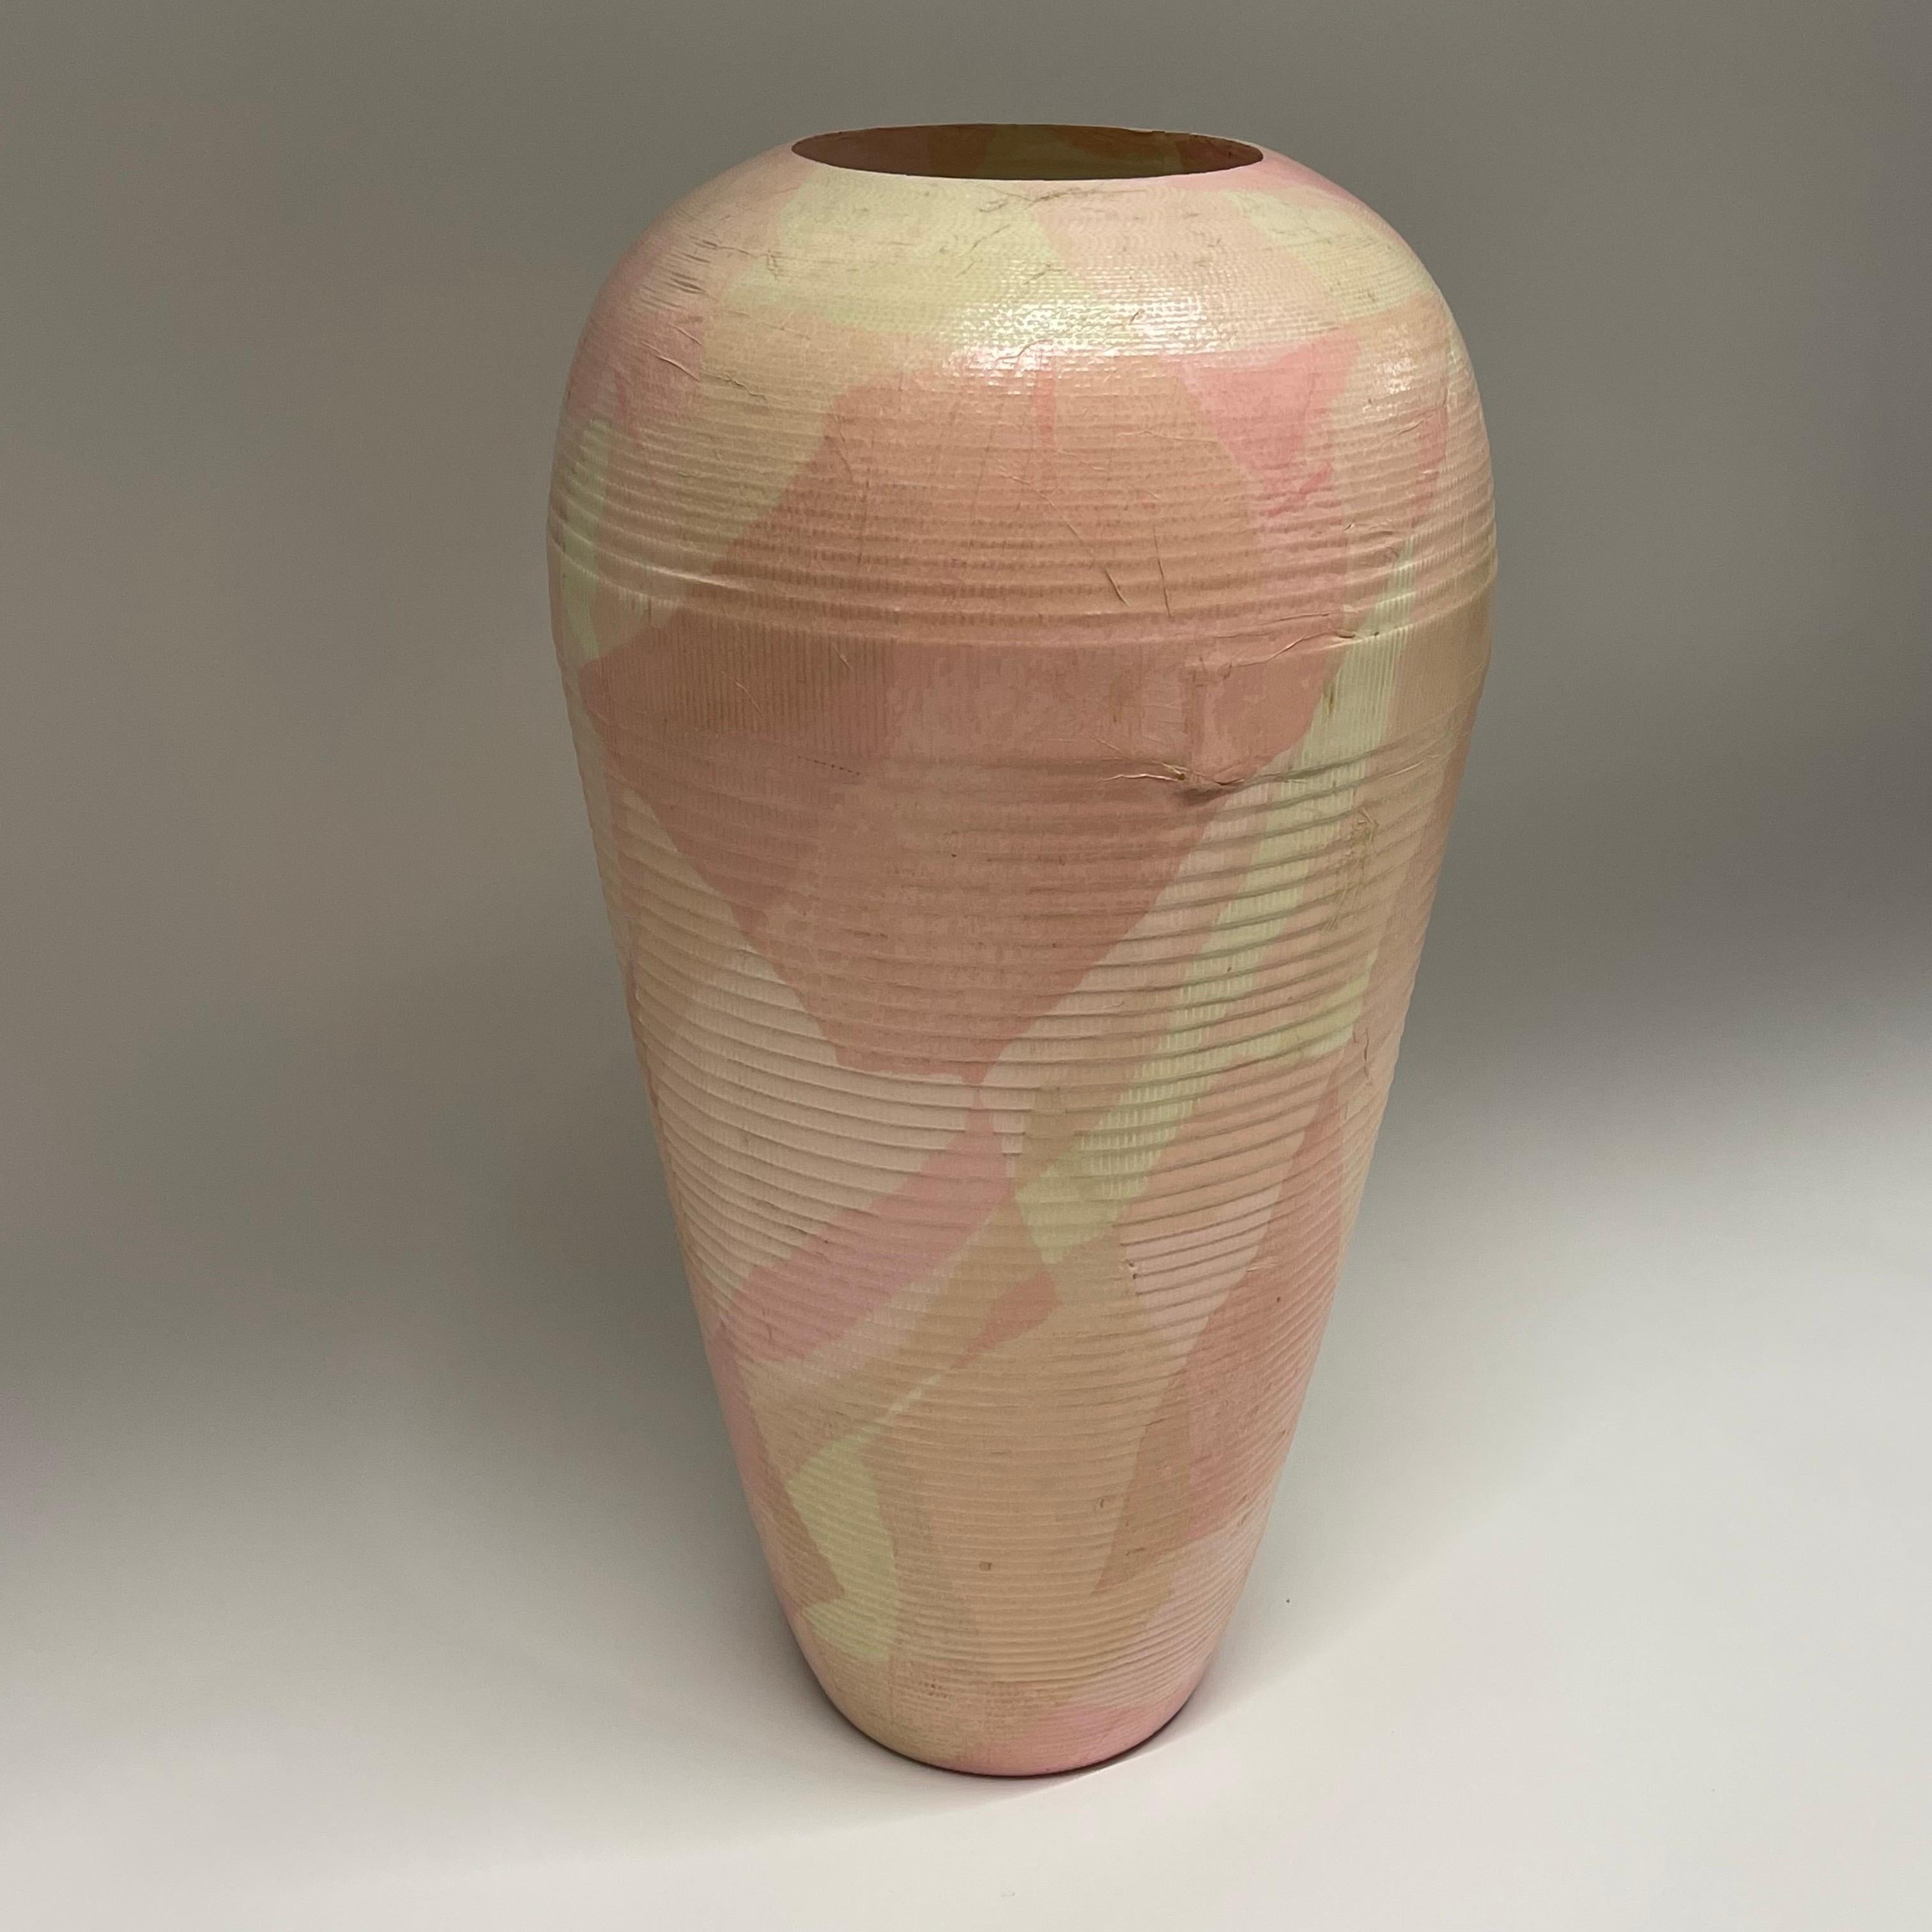 American Post Modern Hand Painted Corrugated Cardboard Vase by Flute, Chicago, c 1989 For Sale